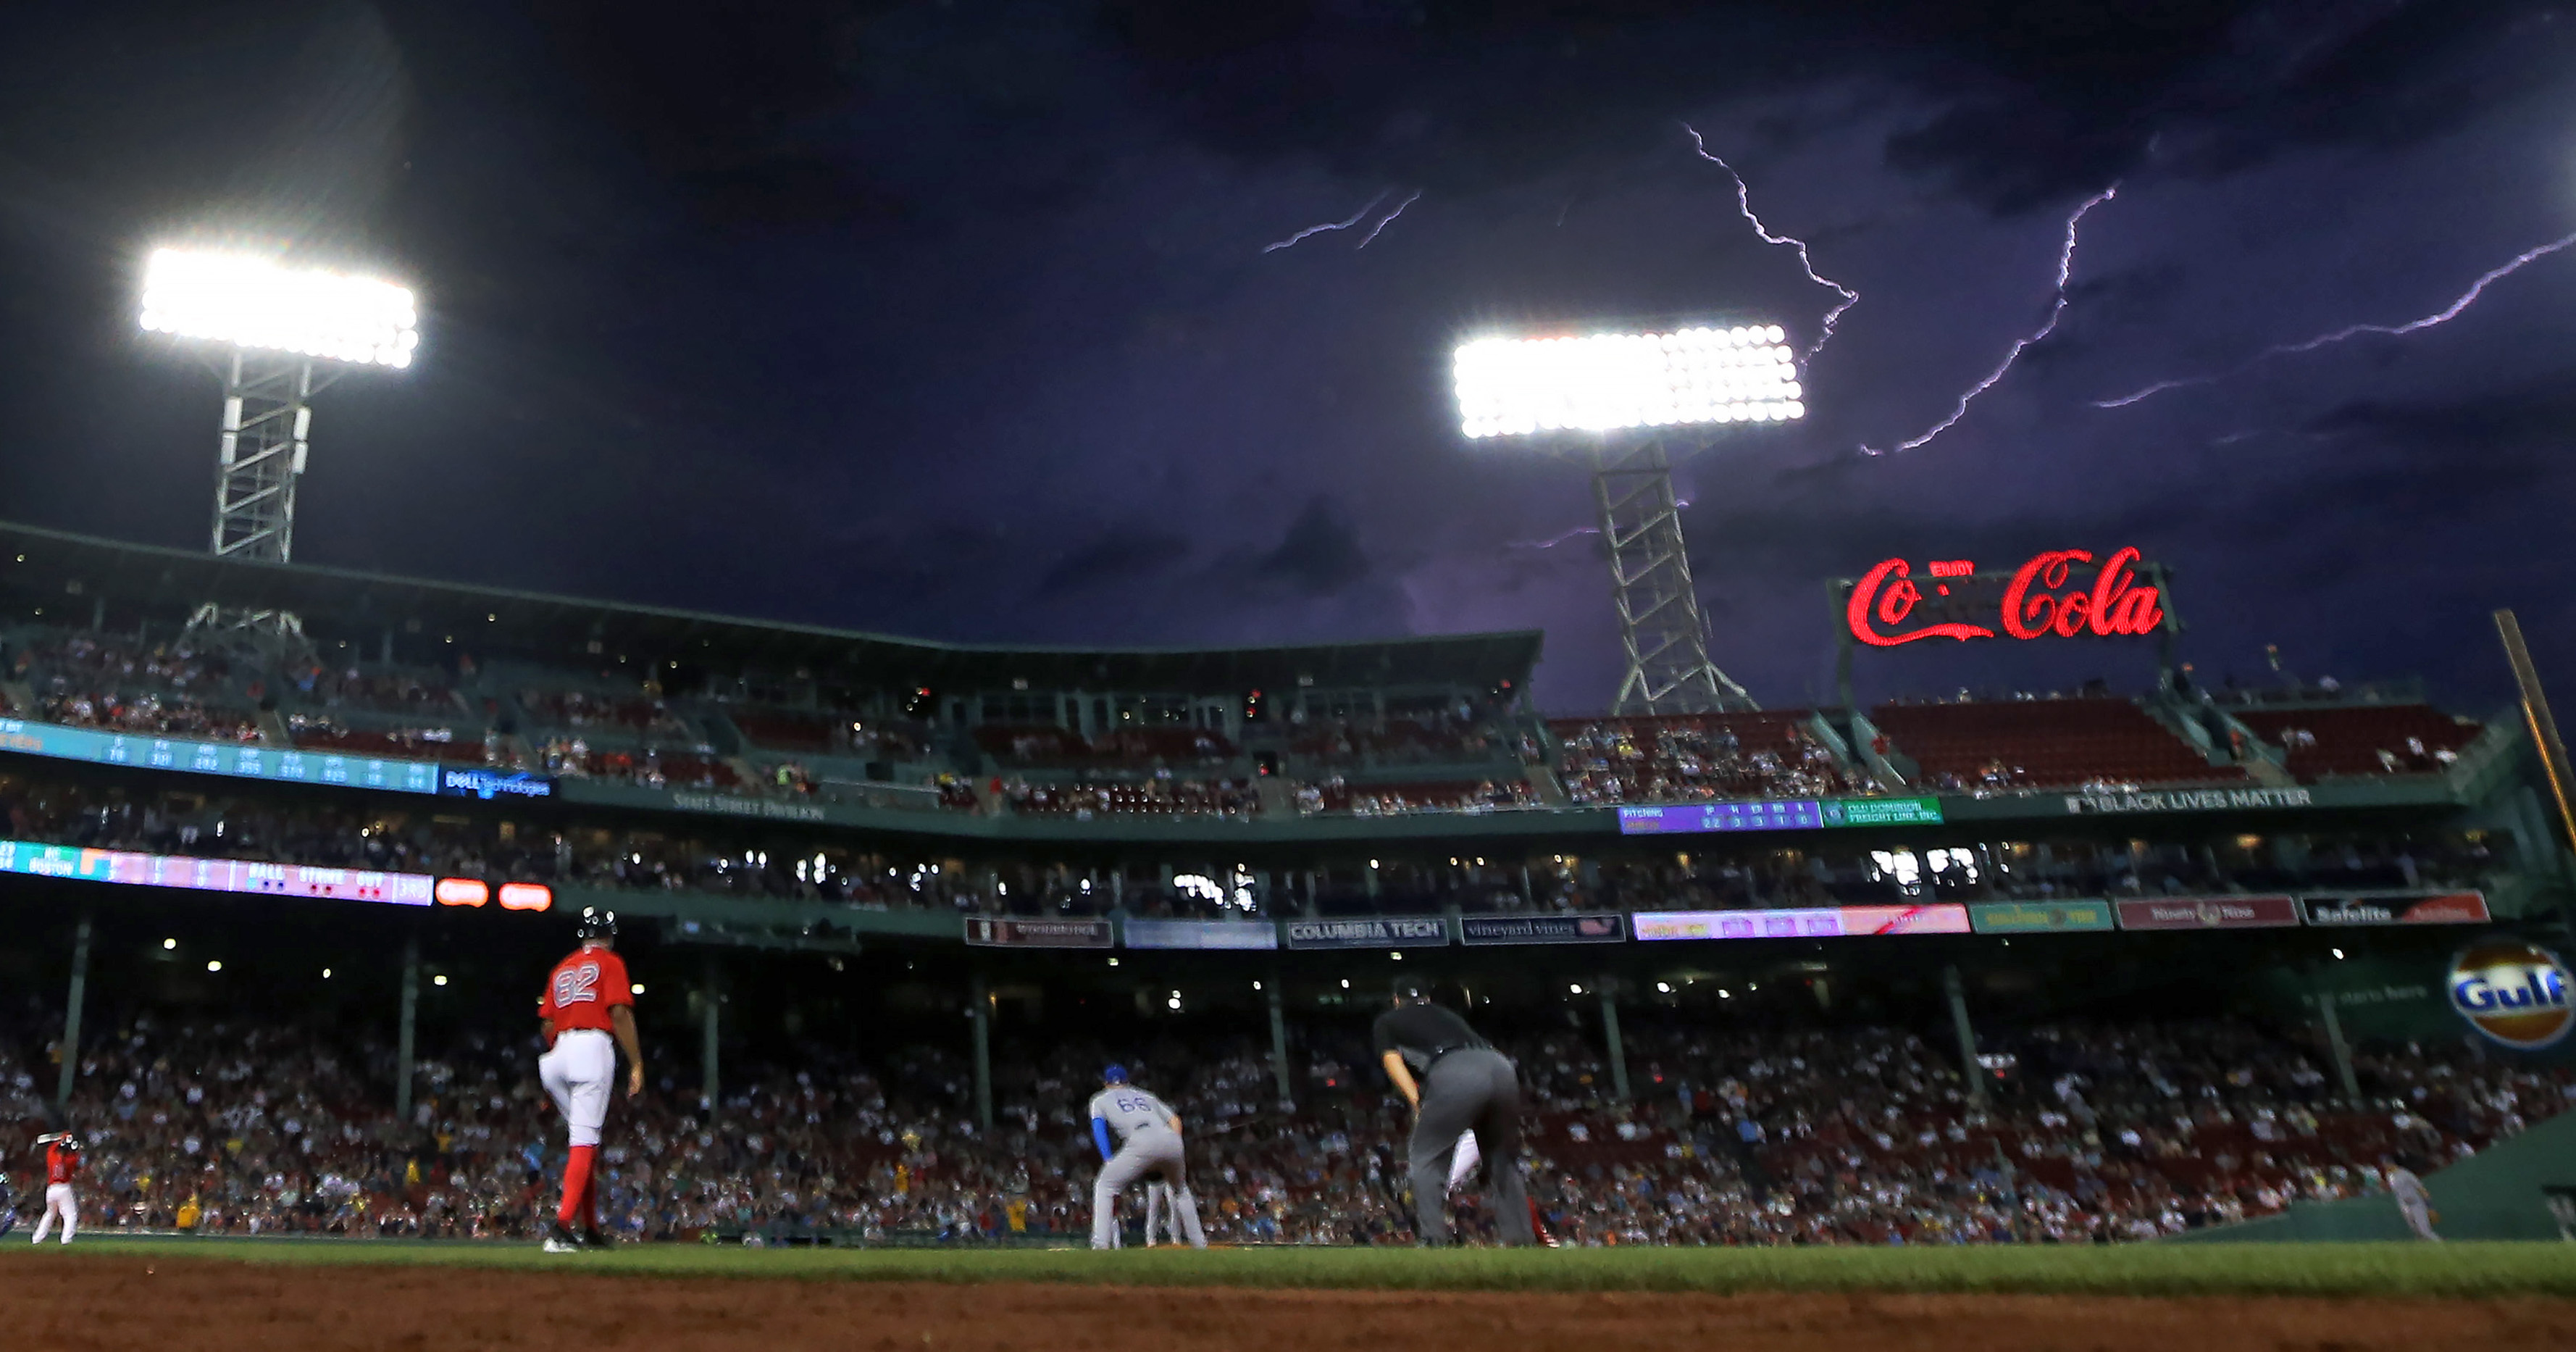 Even lightning can't slow Red Sox, who roll on to sixth straight win - The  Boston Globe